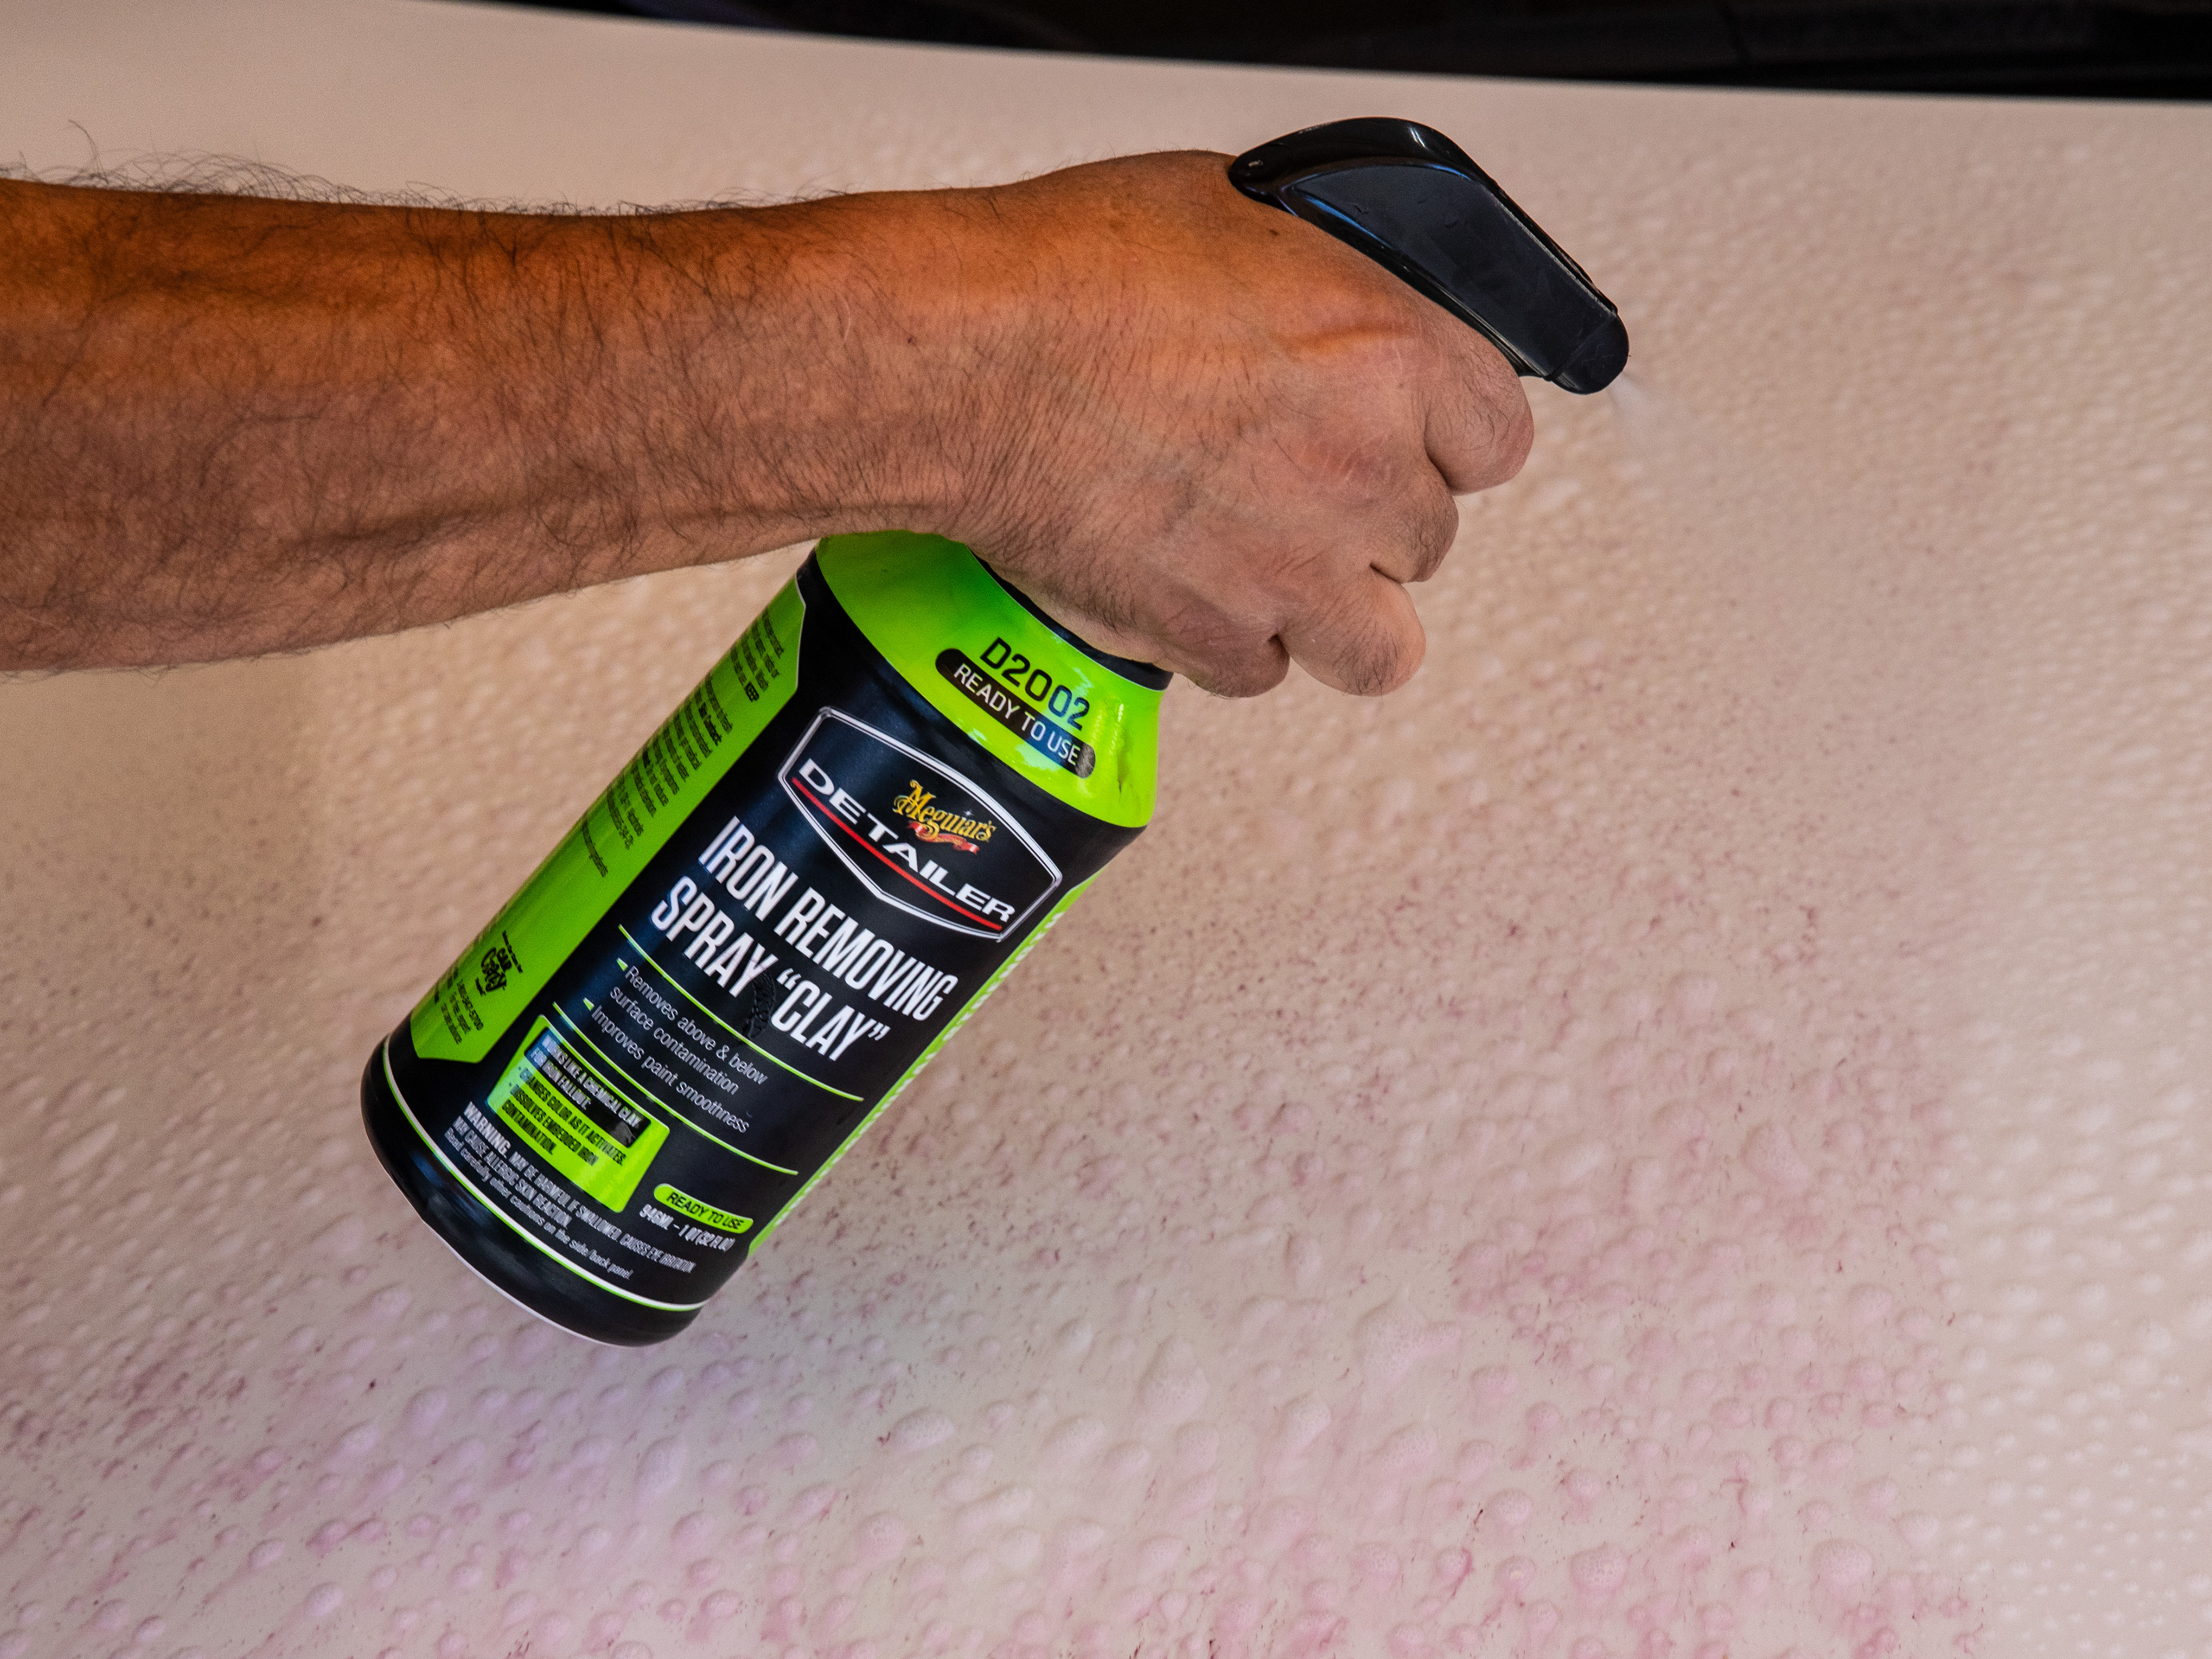 Meguiar's - 💥FALLOUT & IRON REMOVER: Works like a chemical